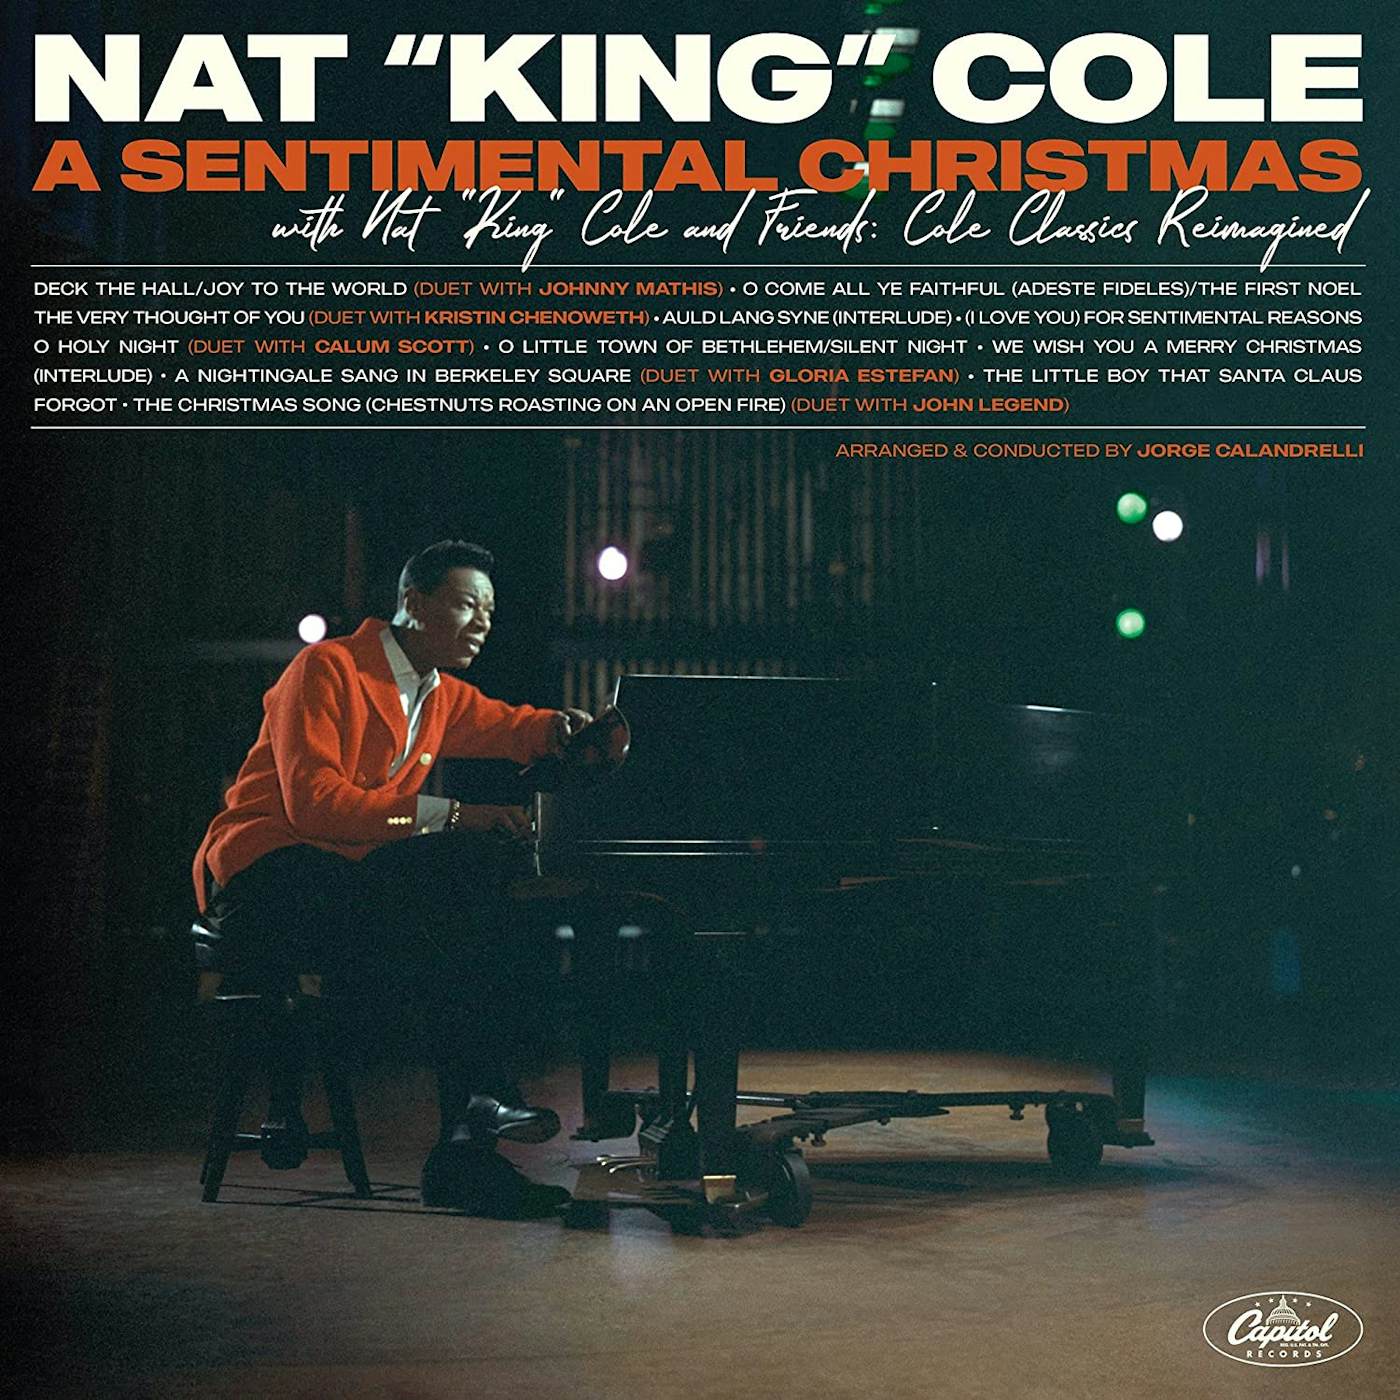 SENTIMENTAL CHRISTMAS WITH NAT KING COLE & FRIENDS (COLE CLASSICS REIMAGINED) Vinyl Record